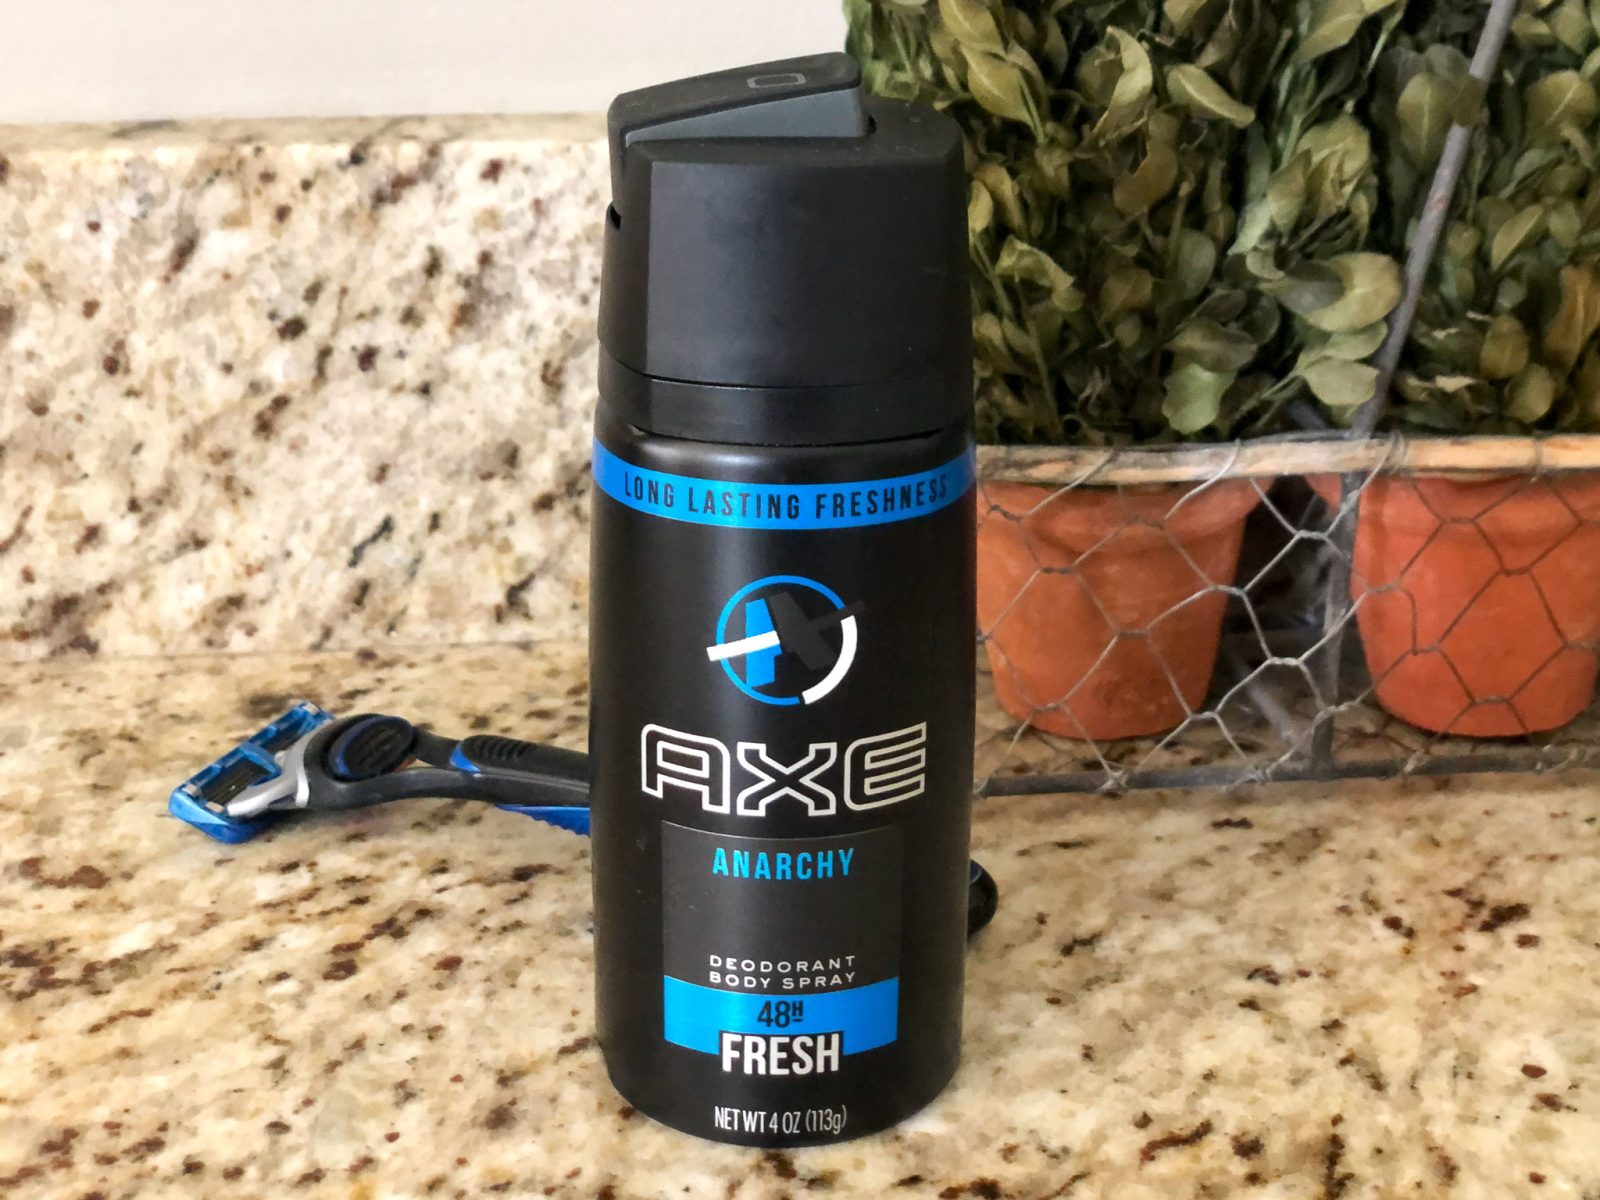 Get Axe Body Spray For Just $3 At Kroger (Regular Price $6.49) – Ends 9/24